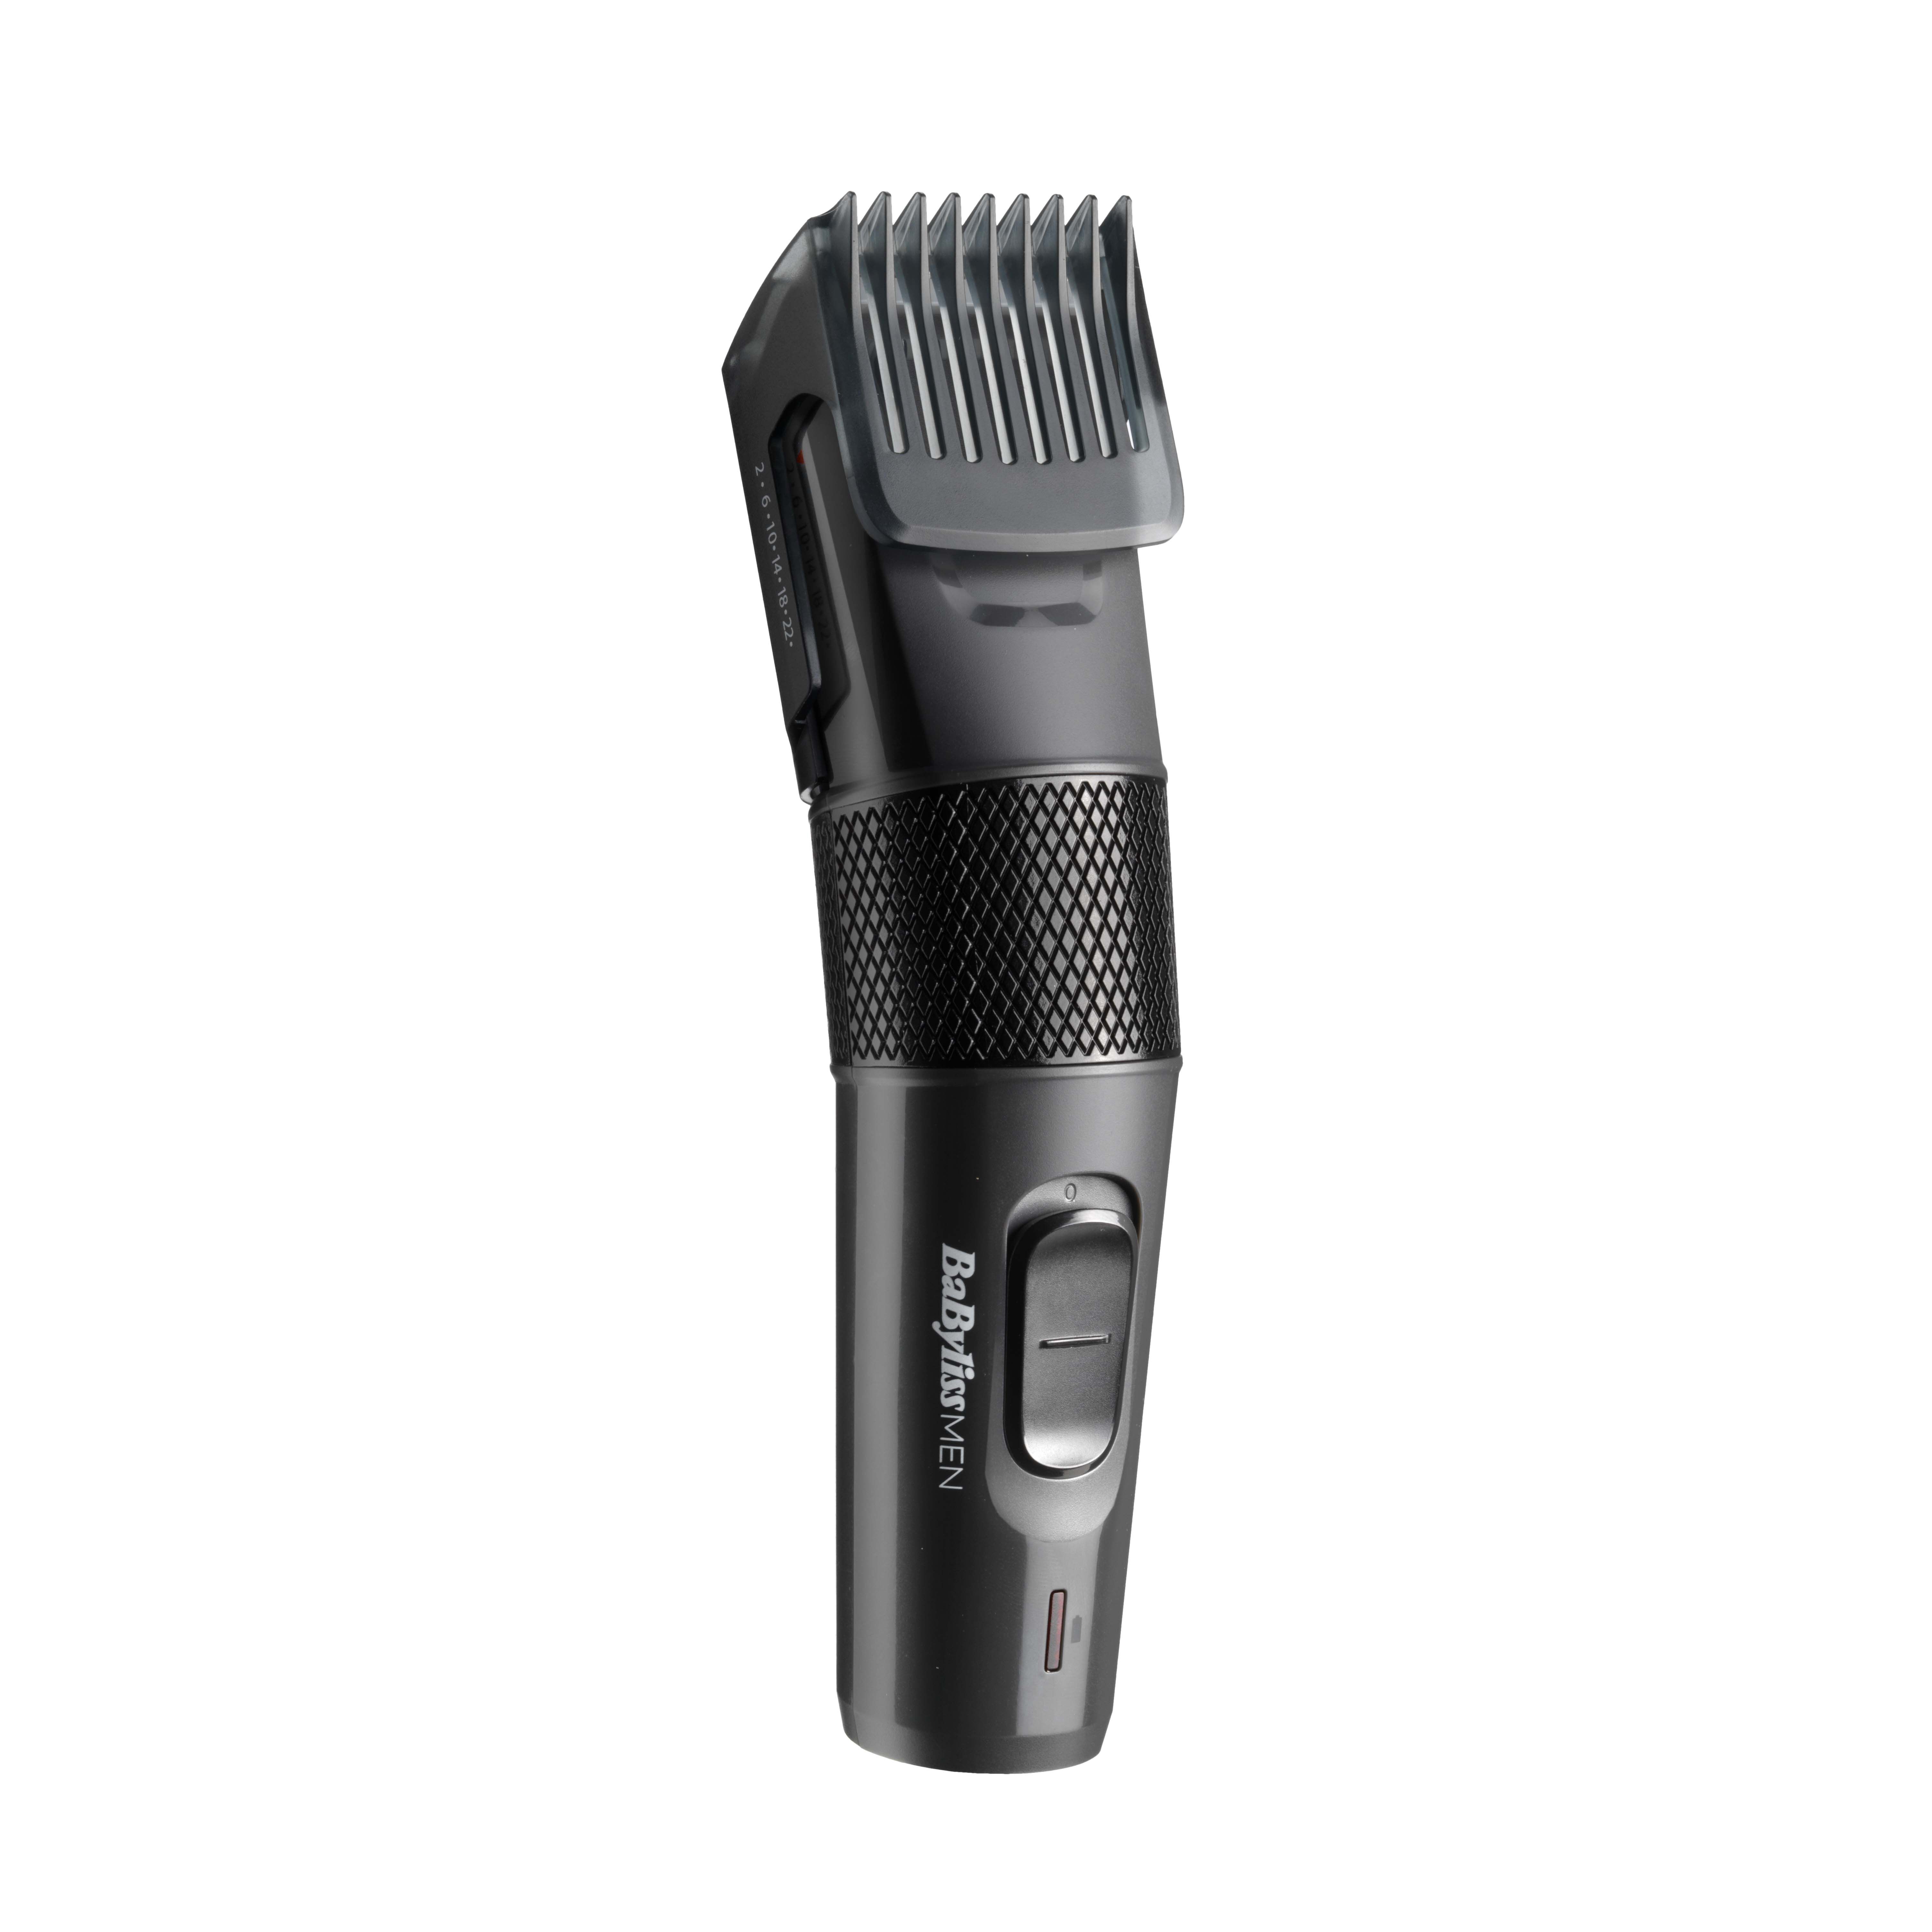 easy to use hair clippers uk